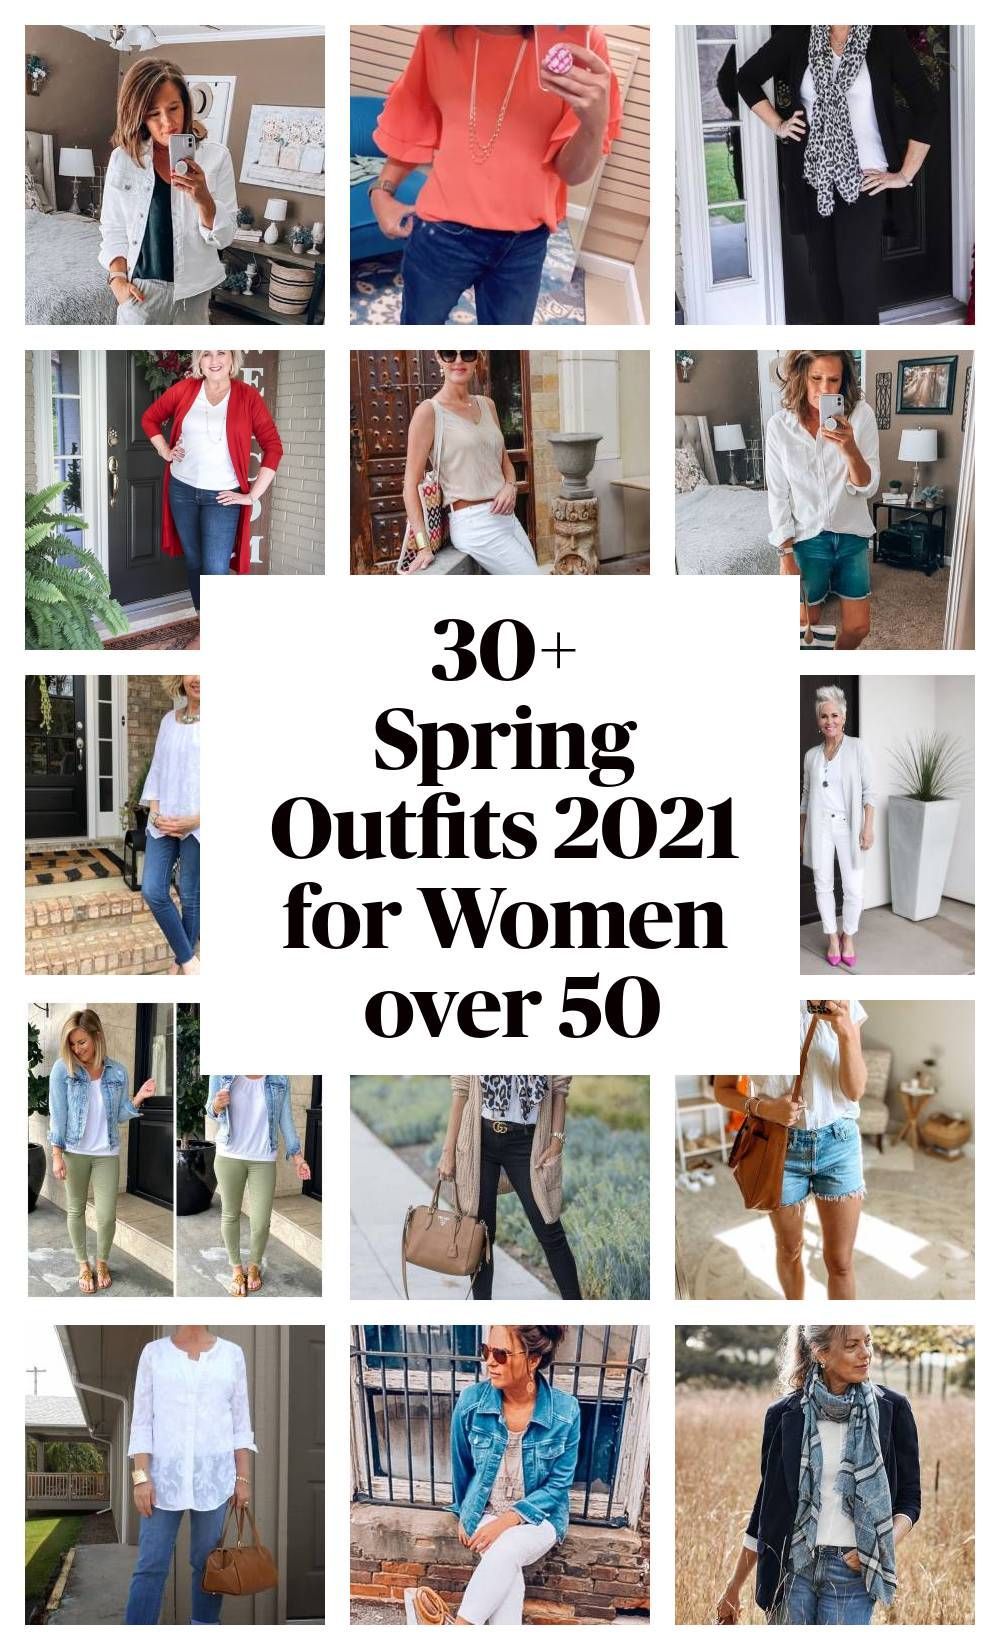 30+ spring outfits 2021 women over 50